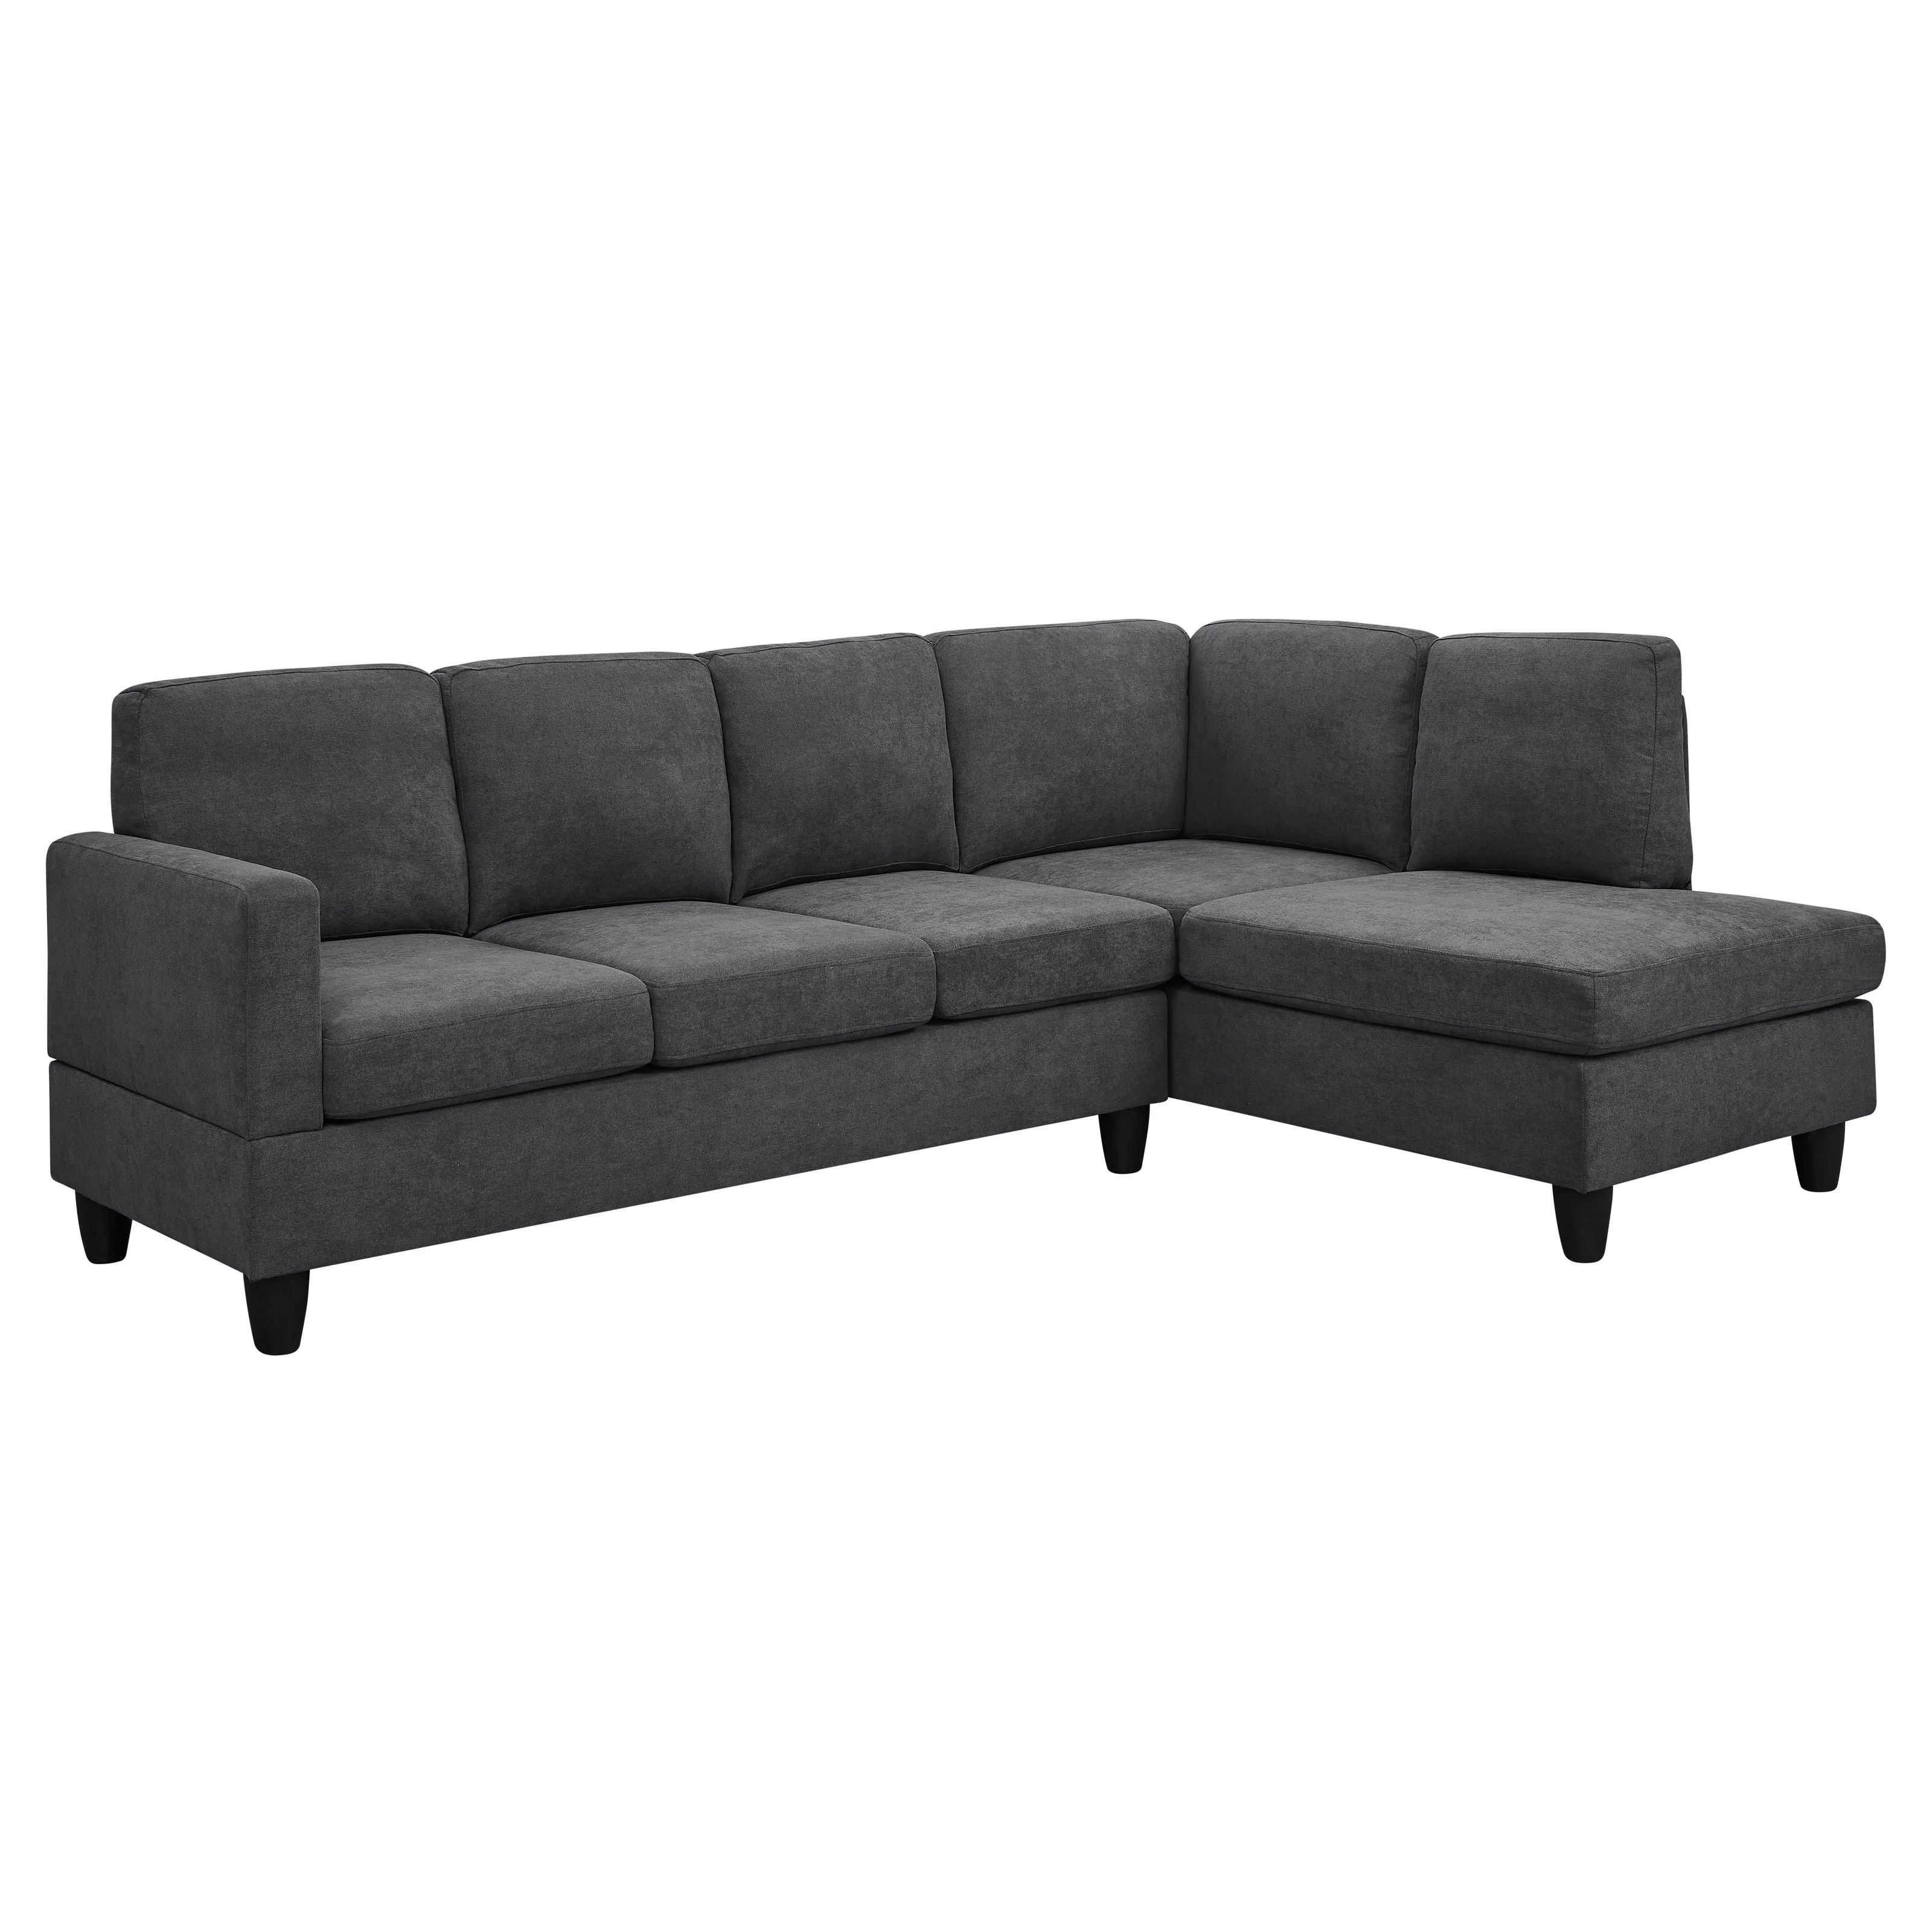 Renner 2 - Piece Upholstered Sectional | Wayfair North America